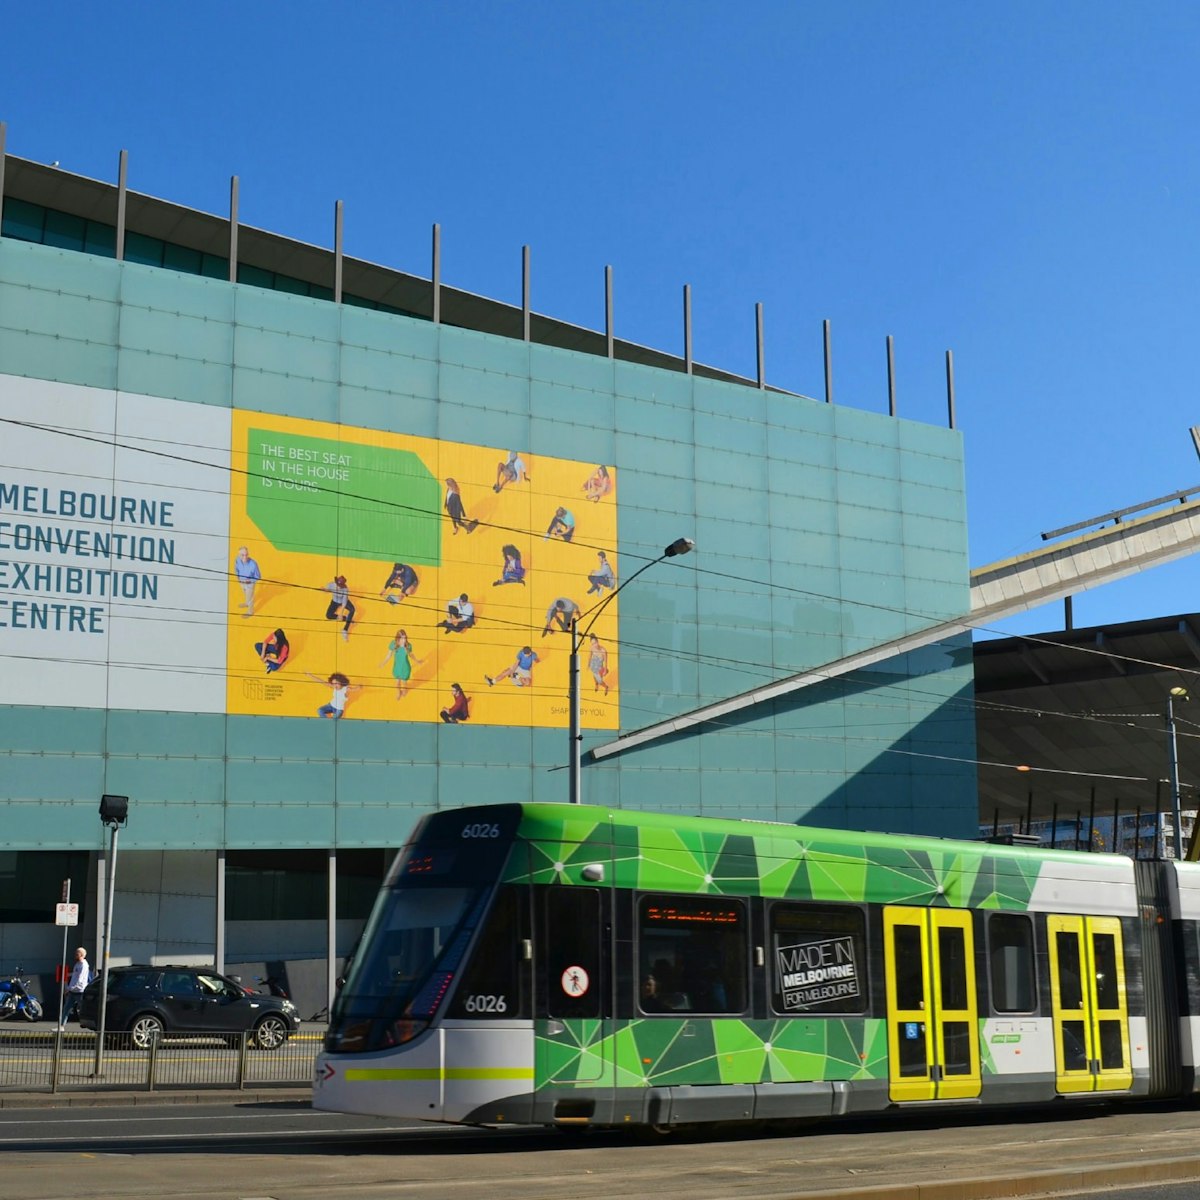 Entrance of the Melbourne Exhibition Centre with tram going by.